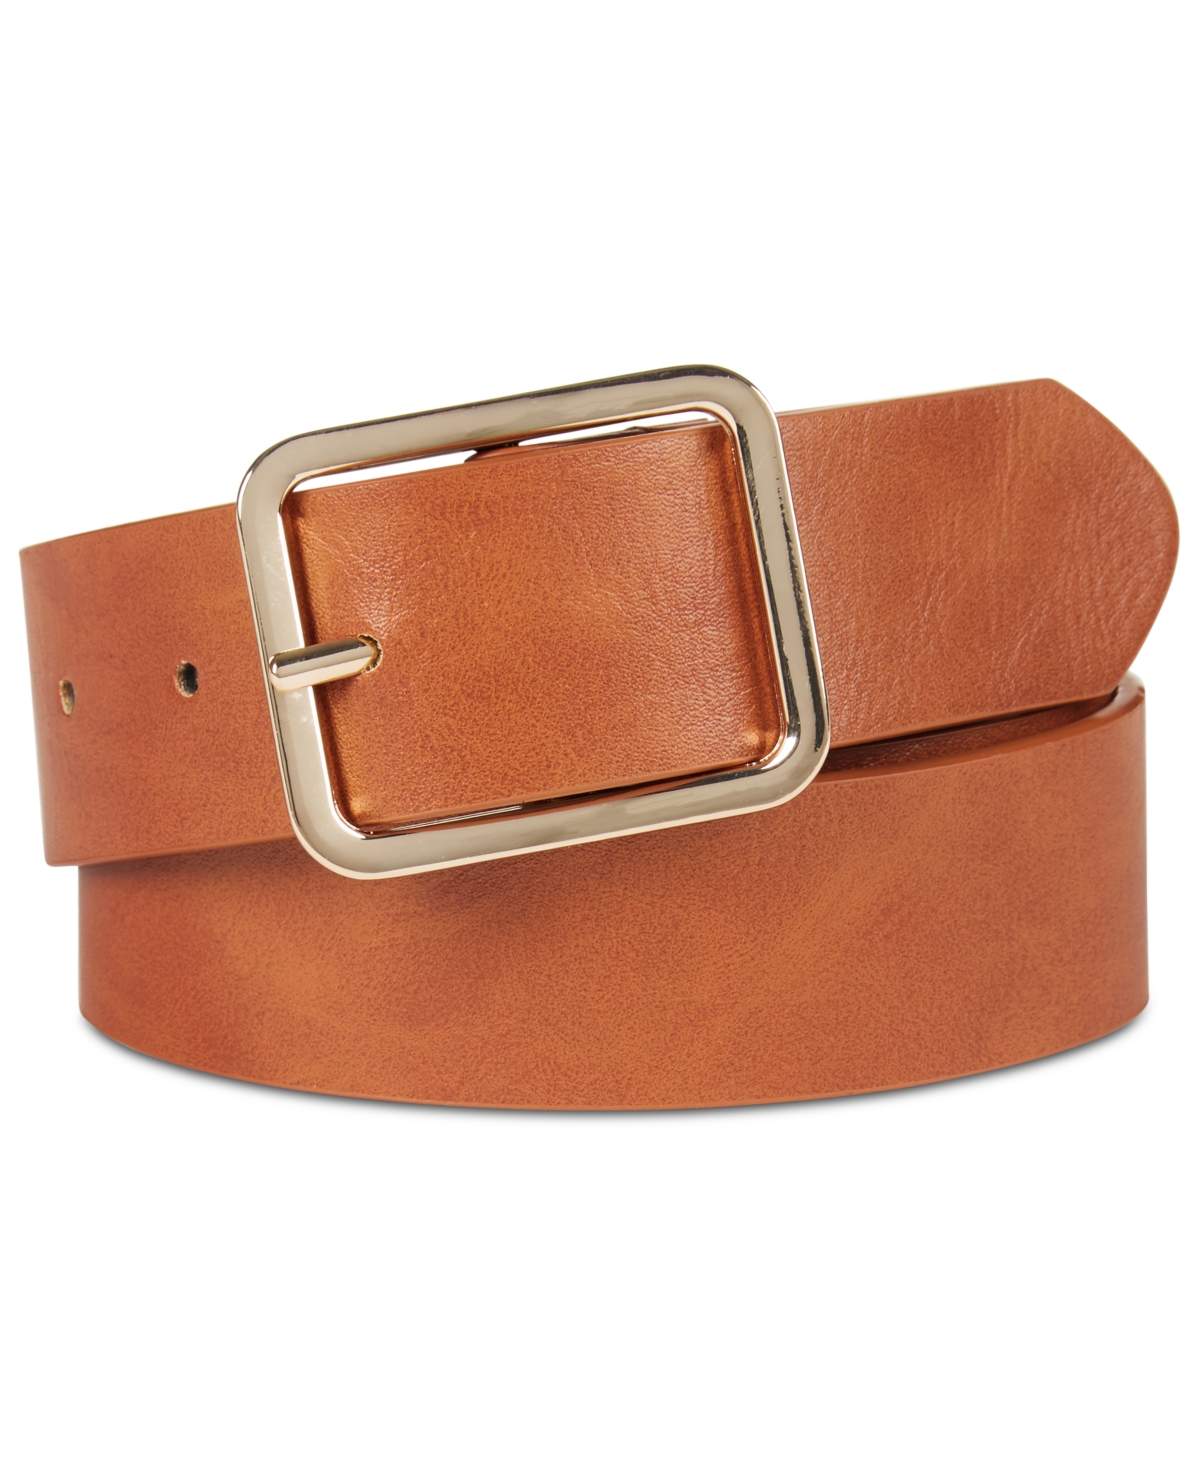 Casual Solid Belt, Created for Macy's - Cognac/Gold